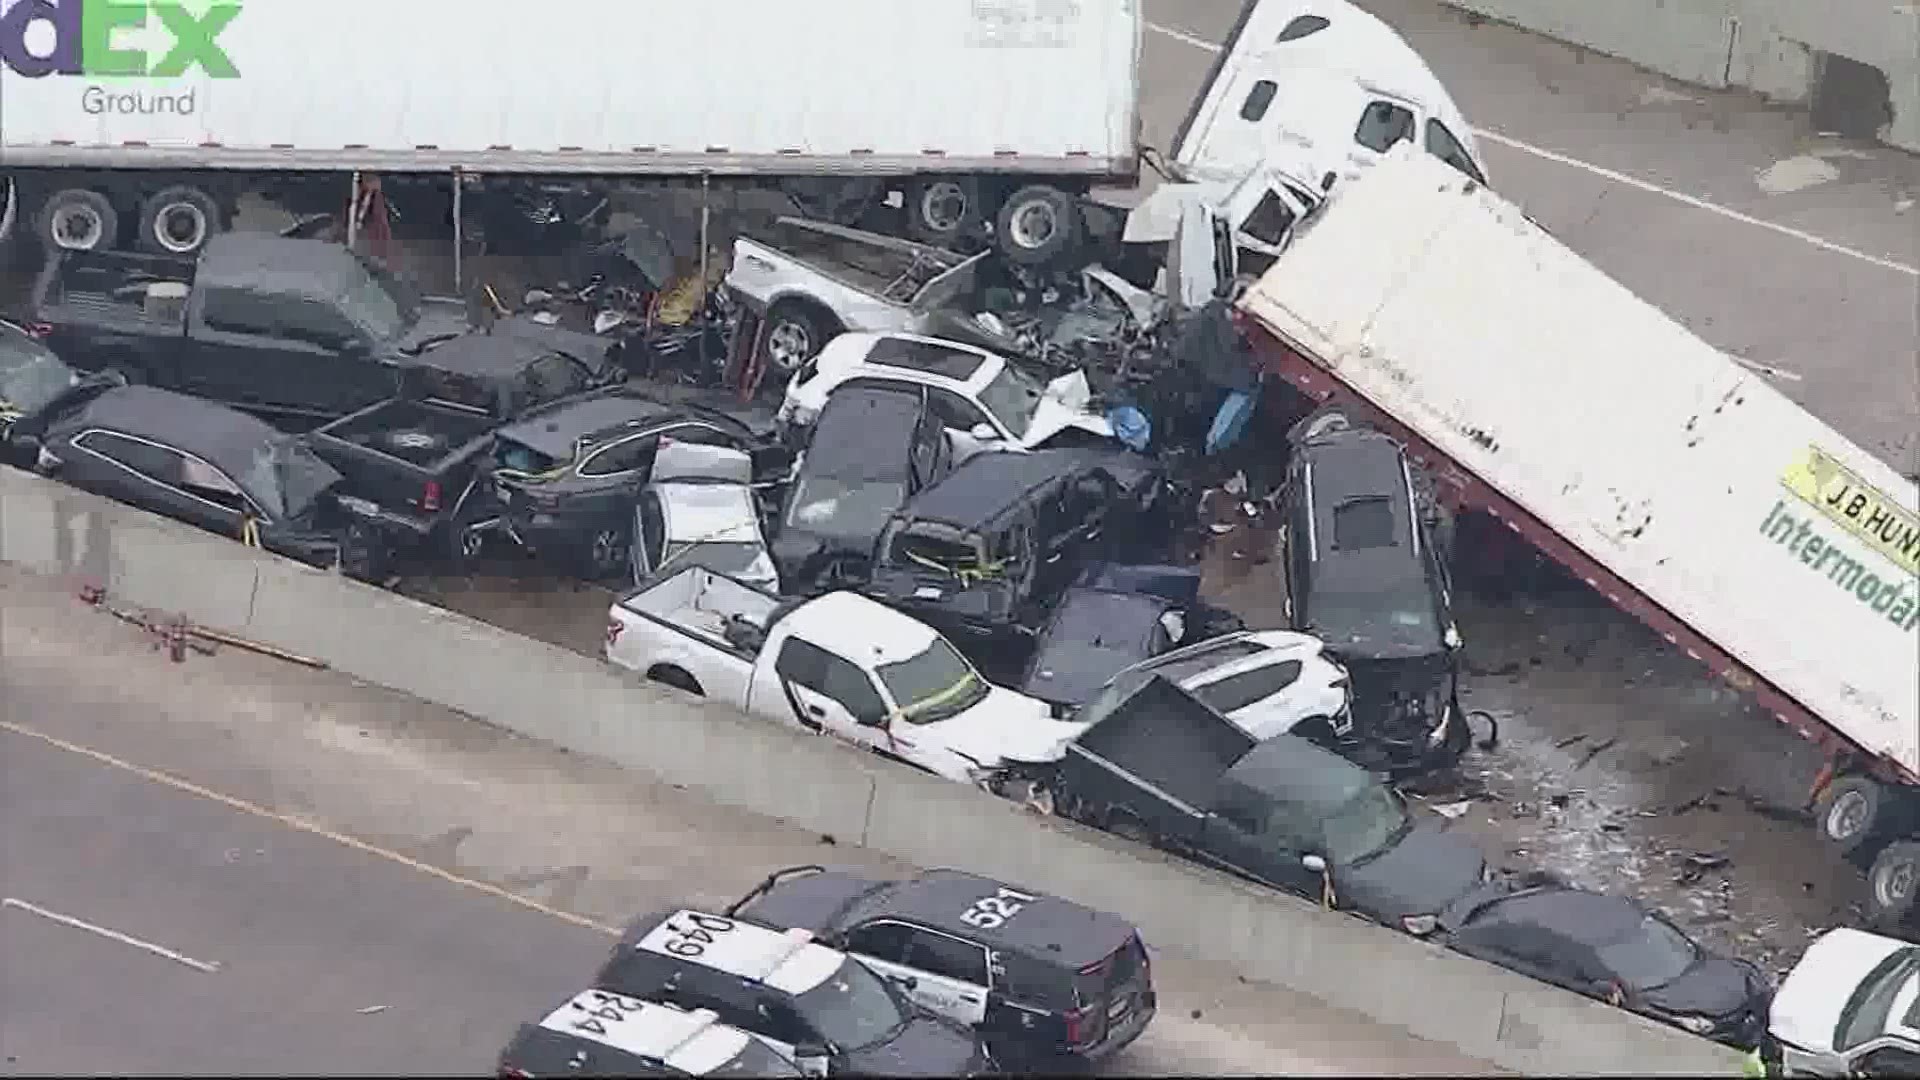 At least 133 vehicles, including several 18-wheelers, were involved in a massive pileup crash Thursday morning on Interstate 35W in Fort Worth.